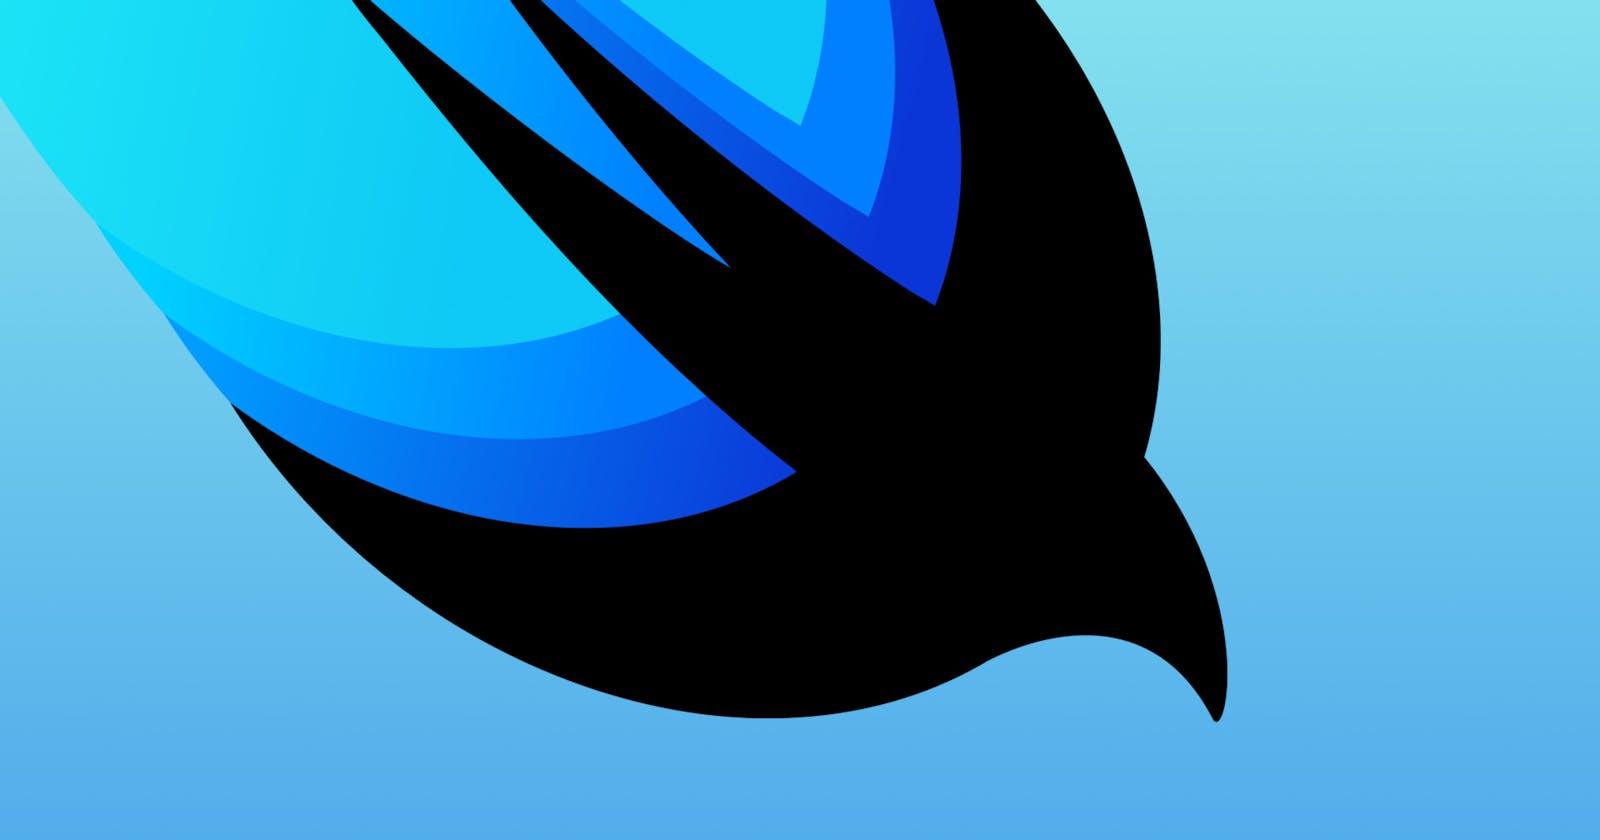 Learn SwiftUI: 24 Essential Tutorials for Beginners